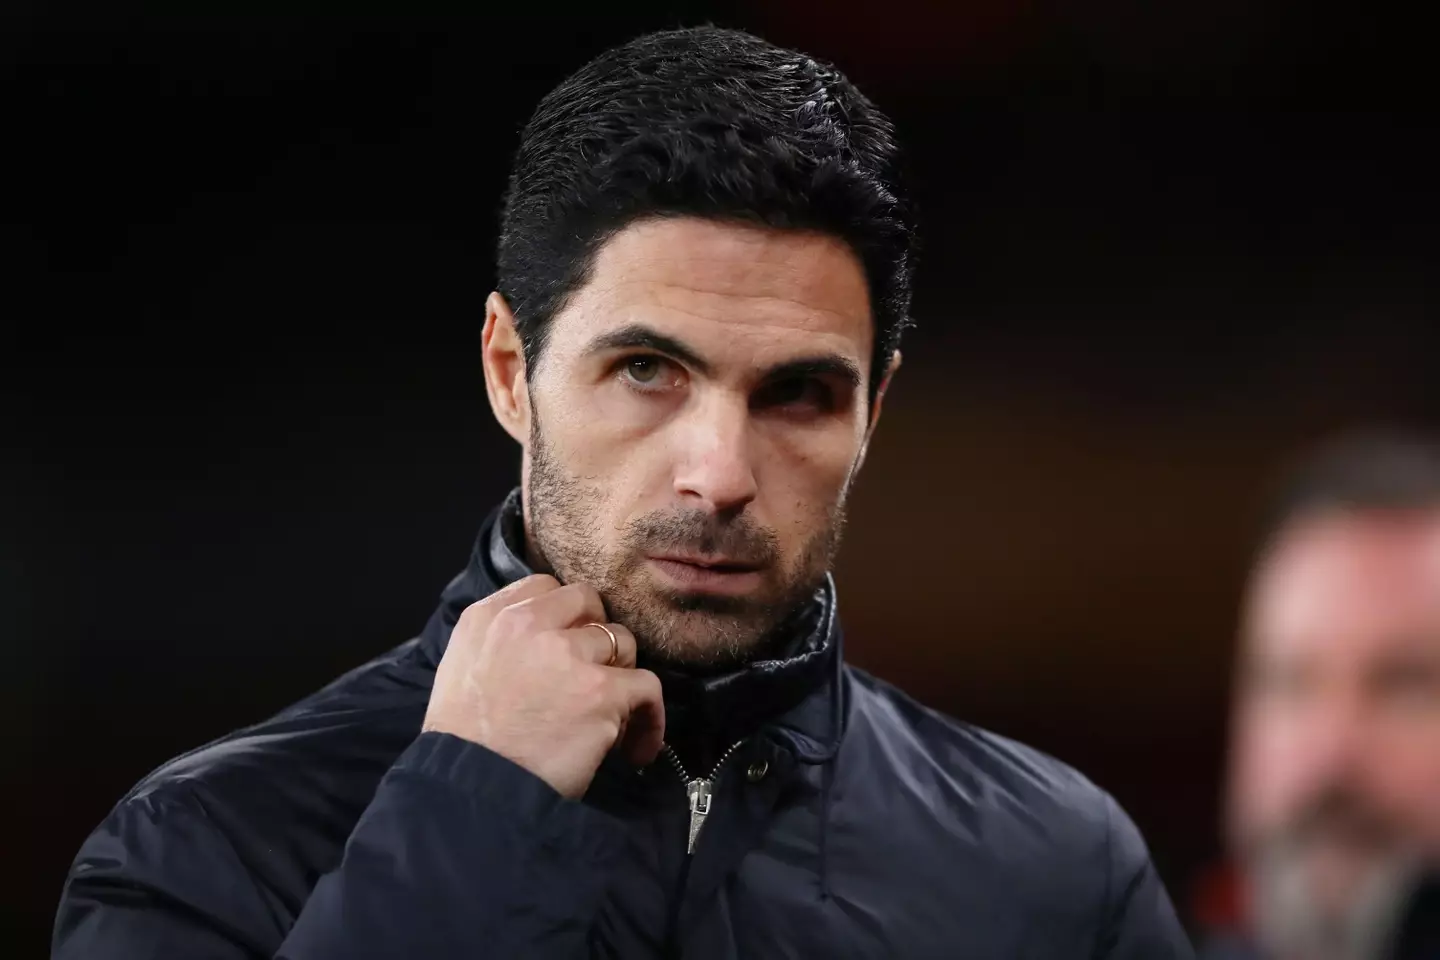 Mikel Arteta's Arsenal side are expected to fall short of Pep Guardiola's Manchester City team in the Premier League title race, according to a supercomputer's predictions.